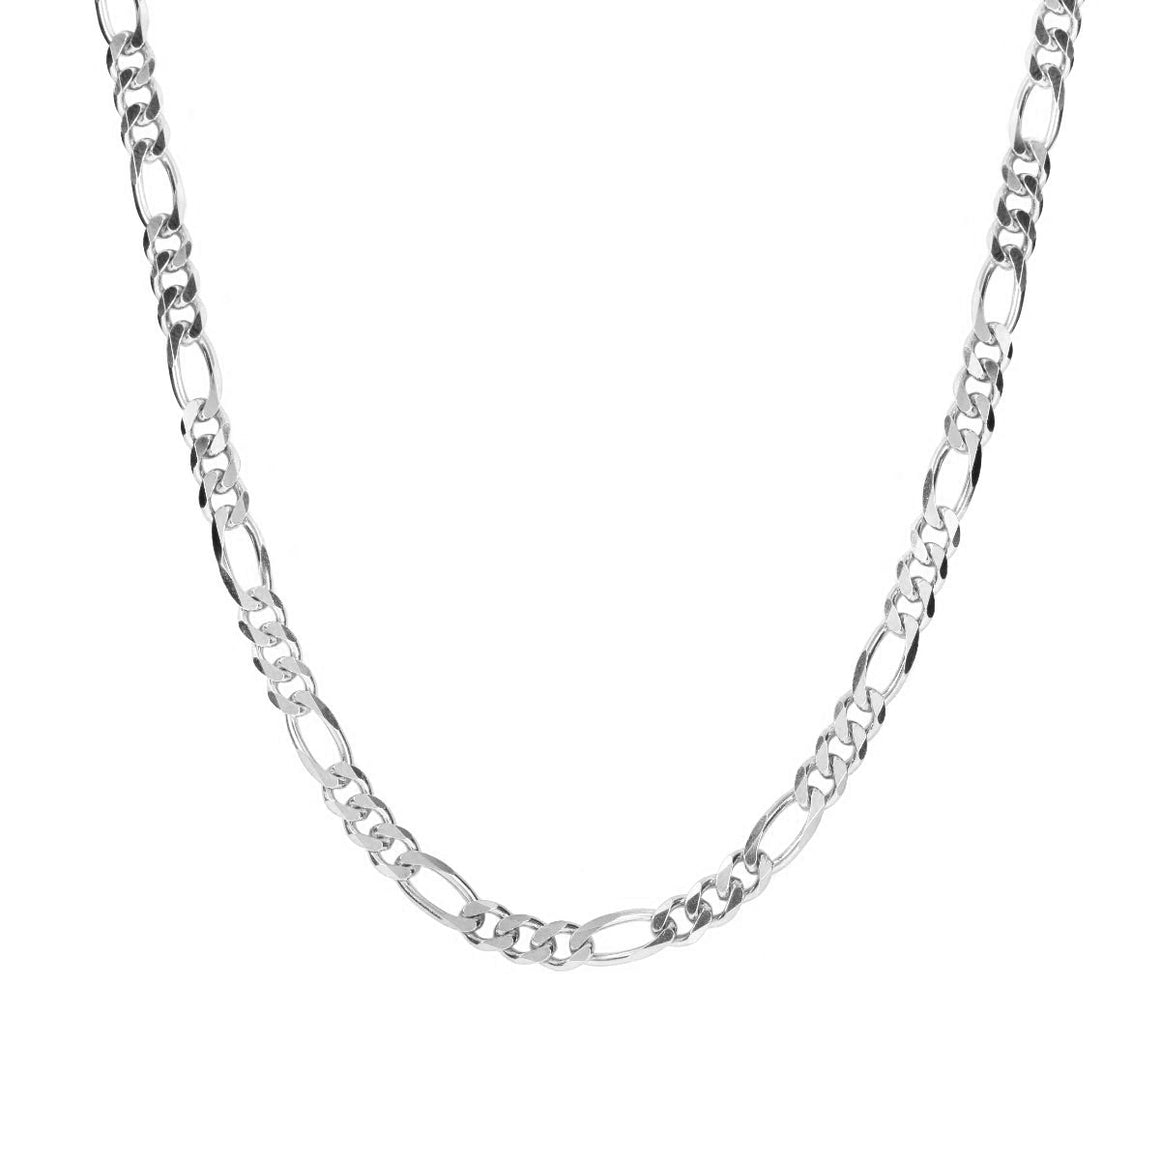 54 FLORAL 15mm FIGARO NECKLACE CHAIN - SILVER